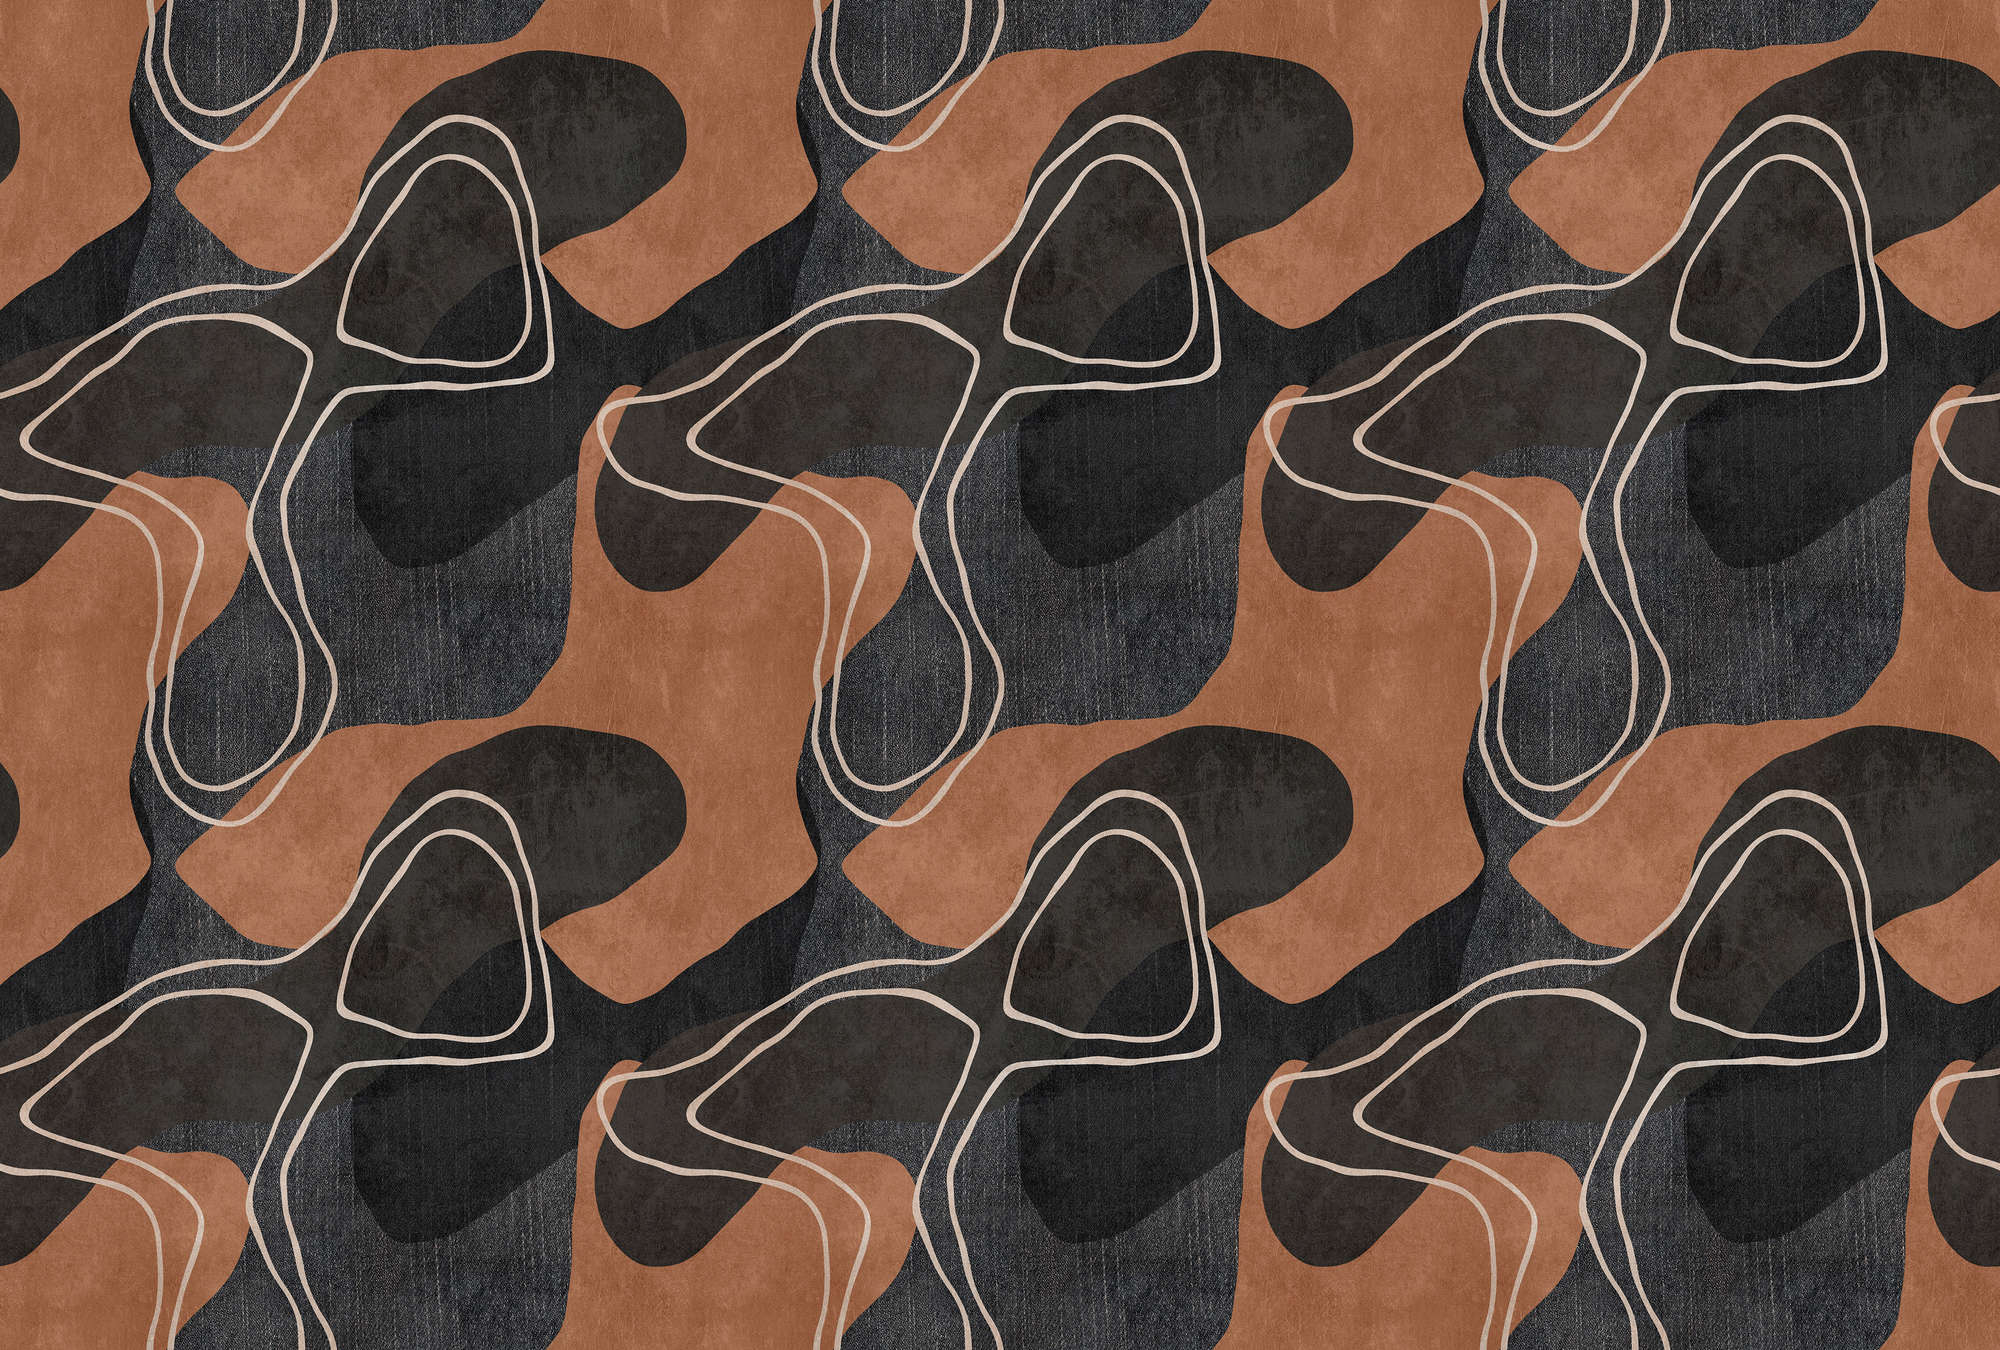             Terra 1 - ethnic mural with abstract design in earth tones
        